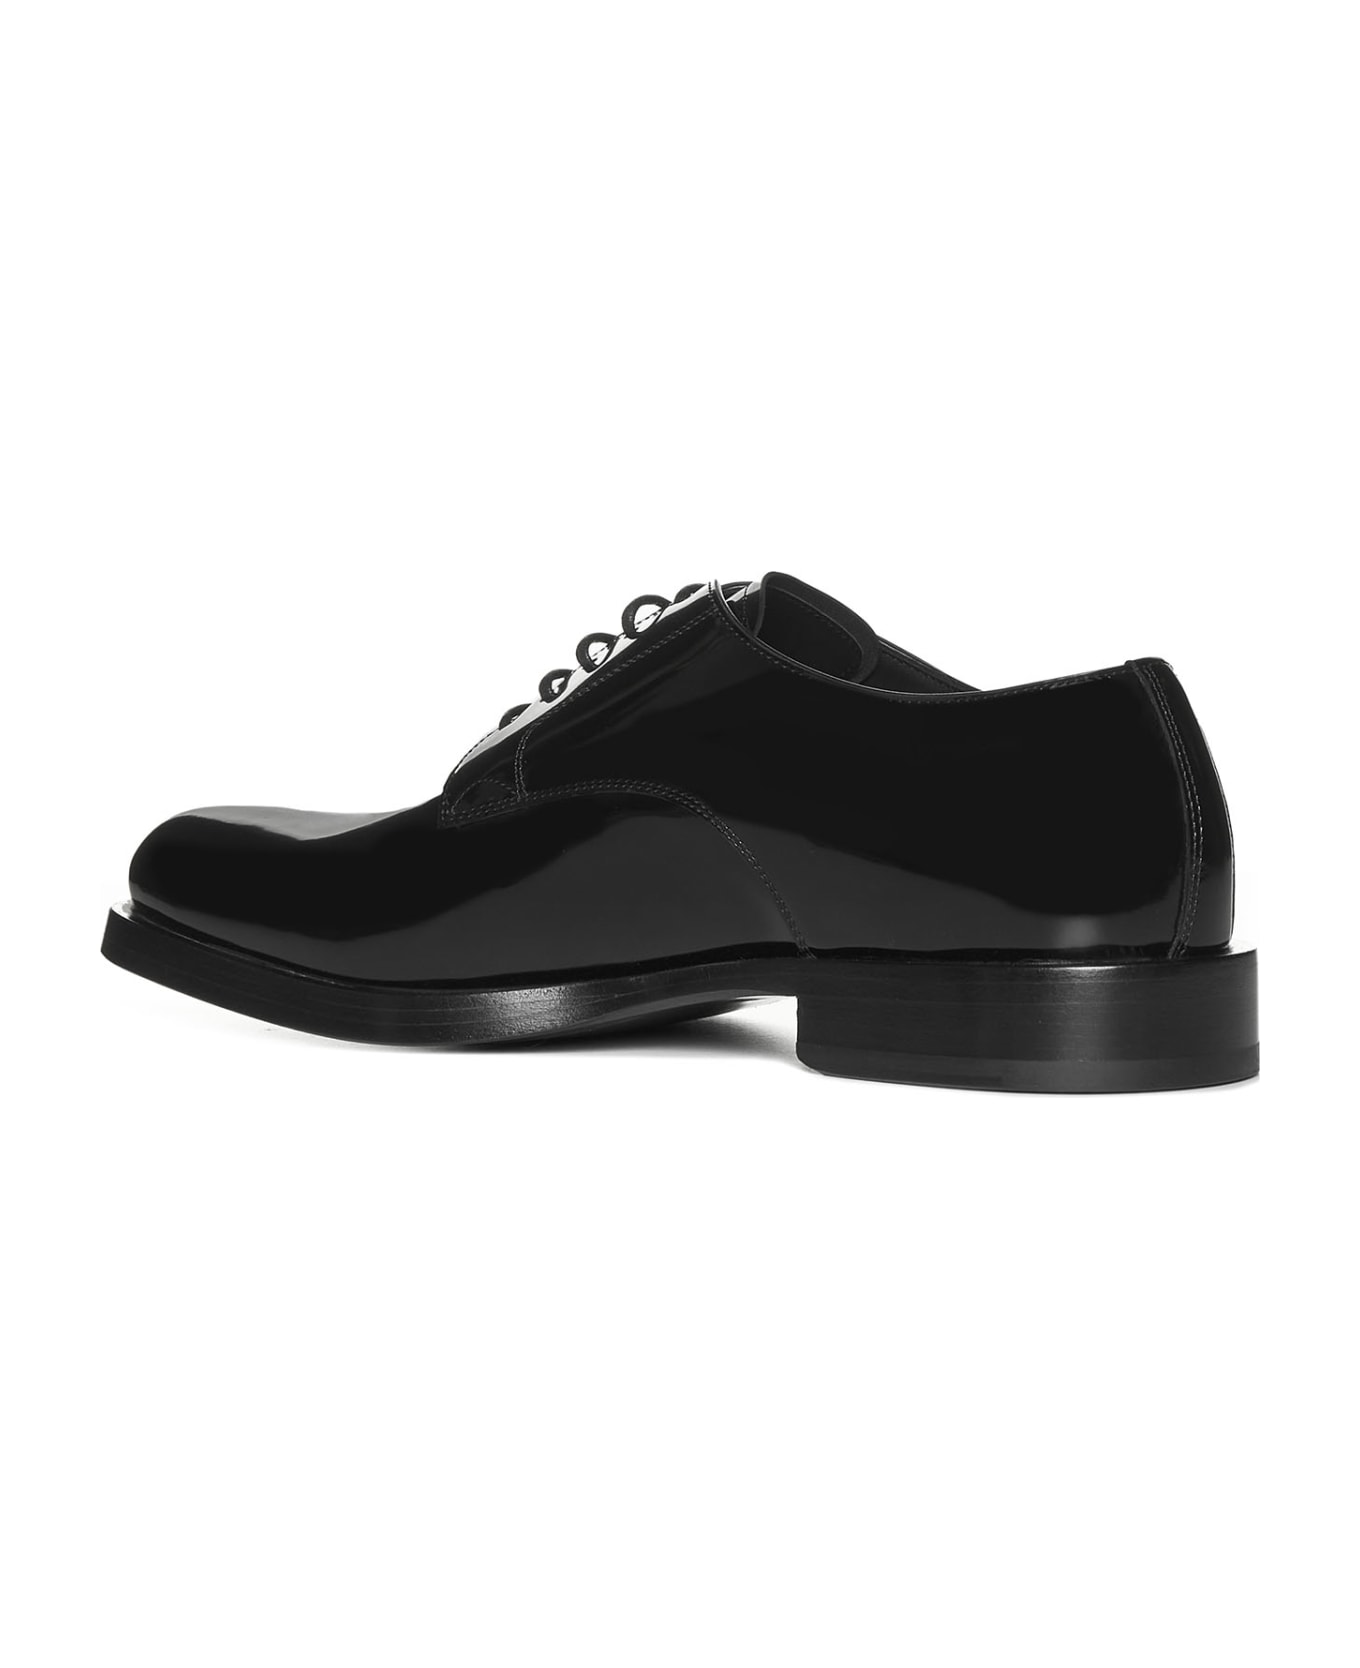 Dolce & Gabbana Classic Lace-up Derby Shoes - Nero ローファー＆デッキシューズ